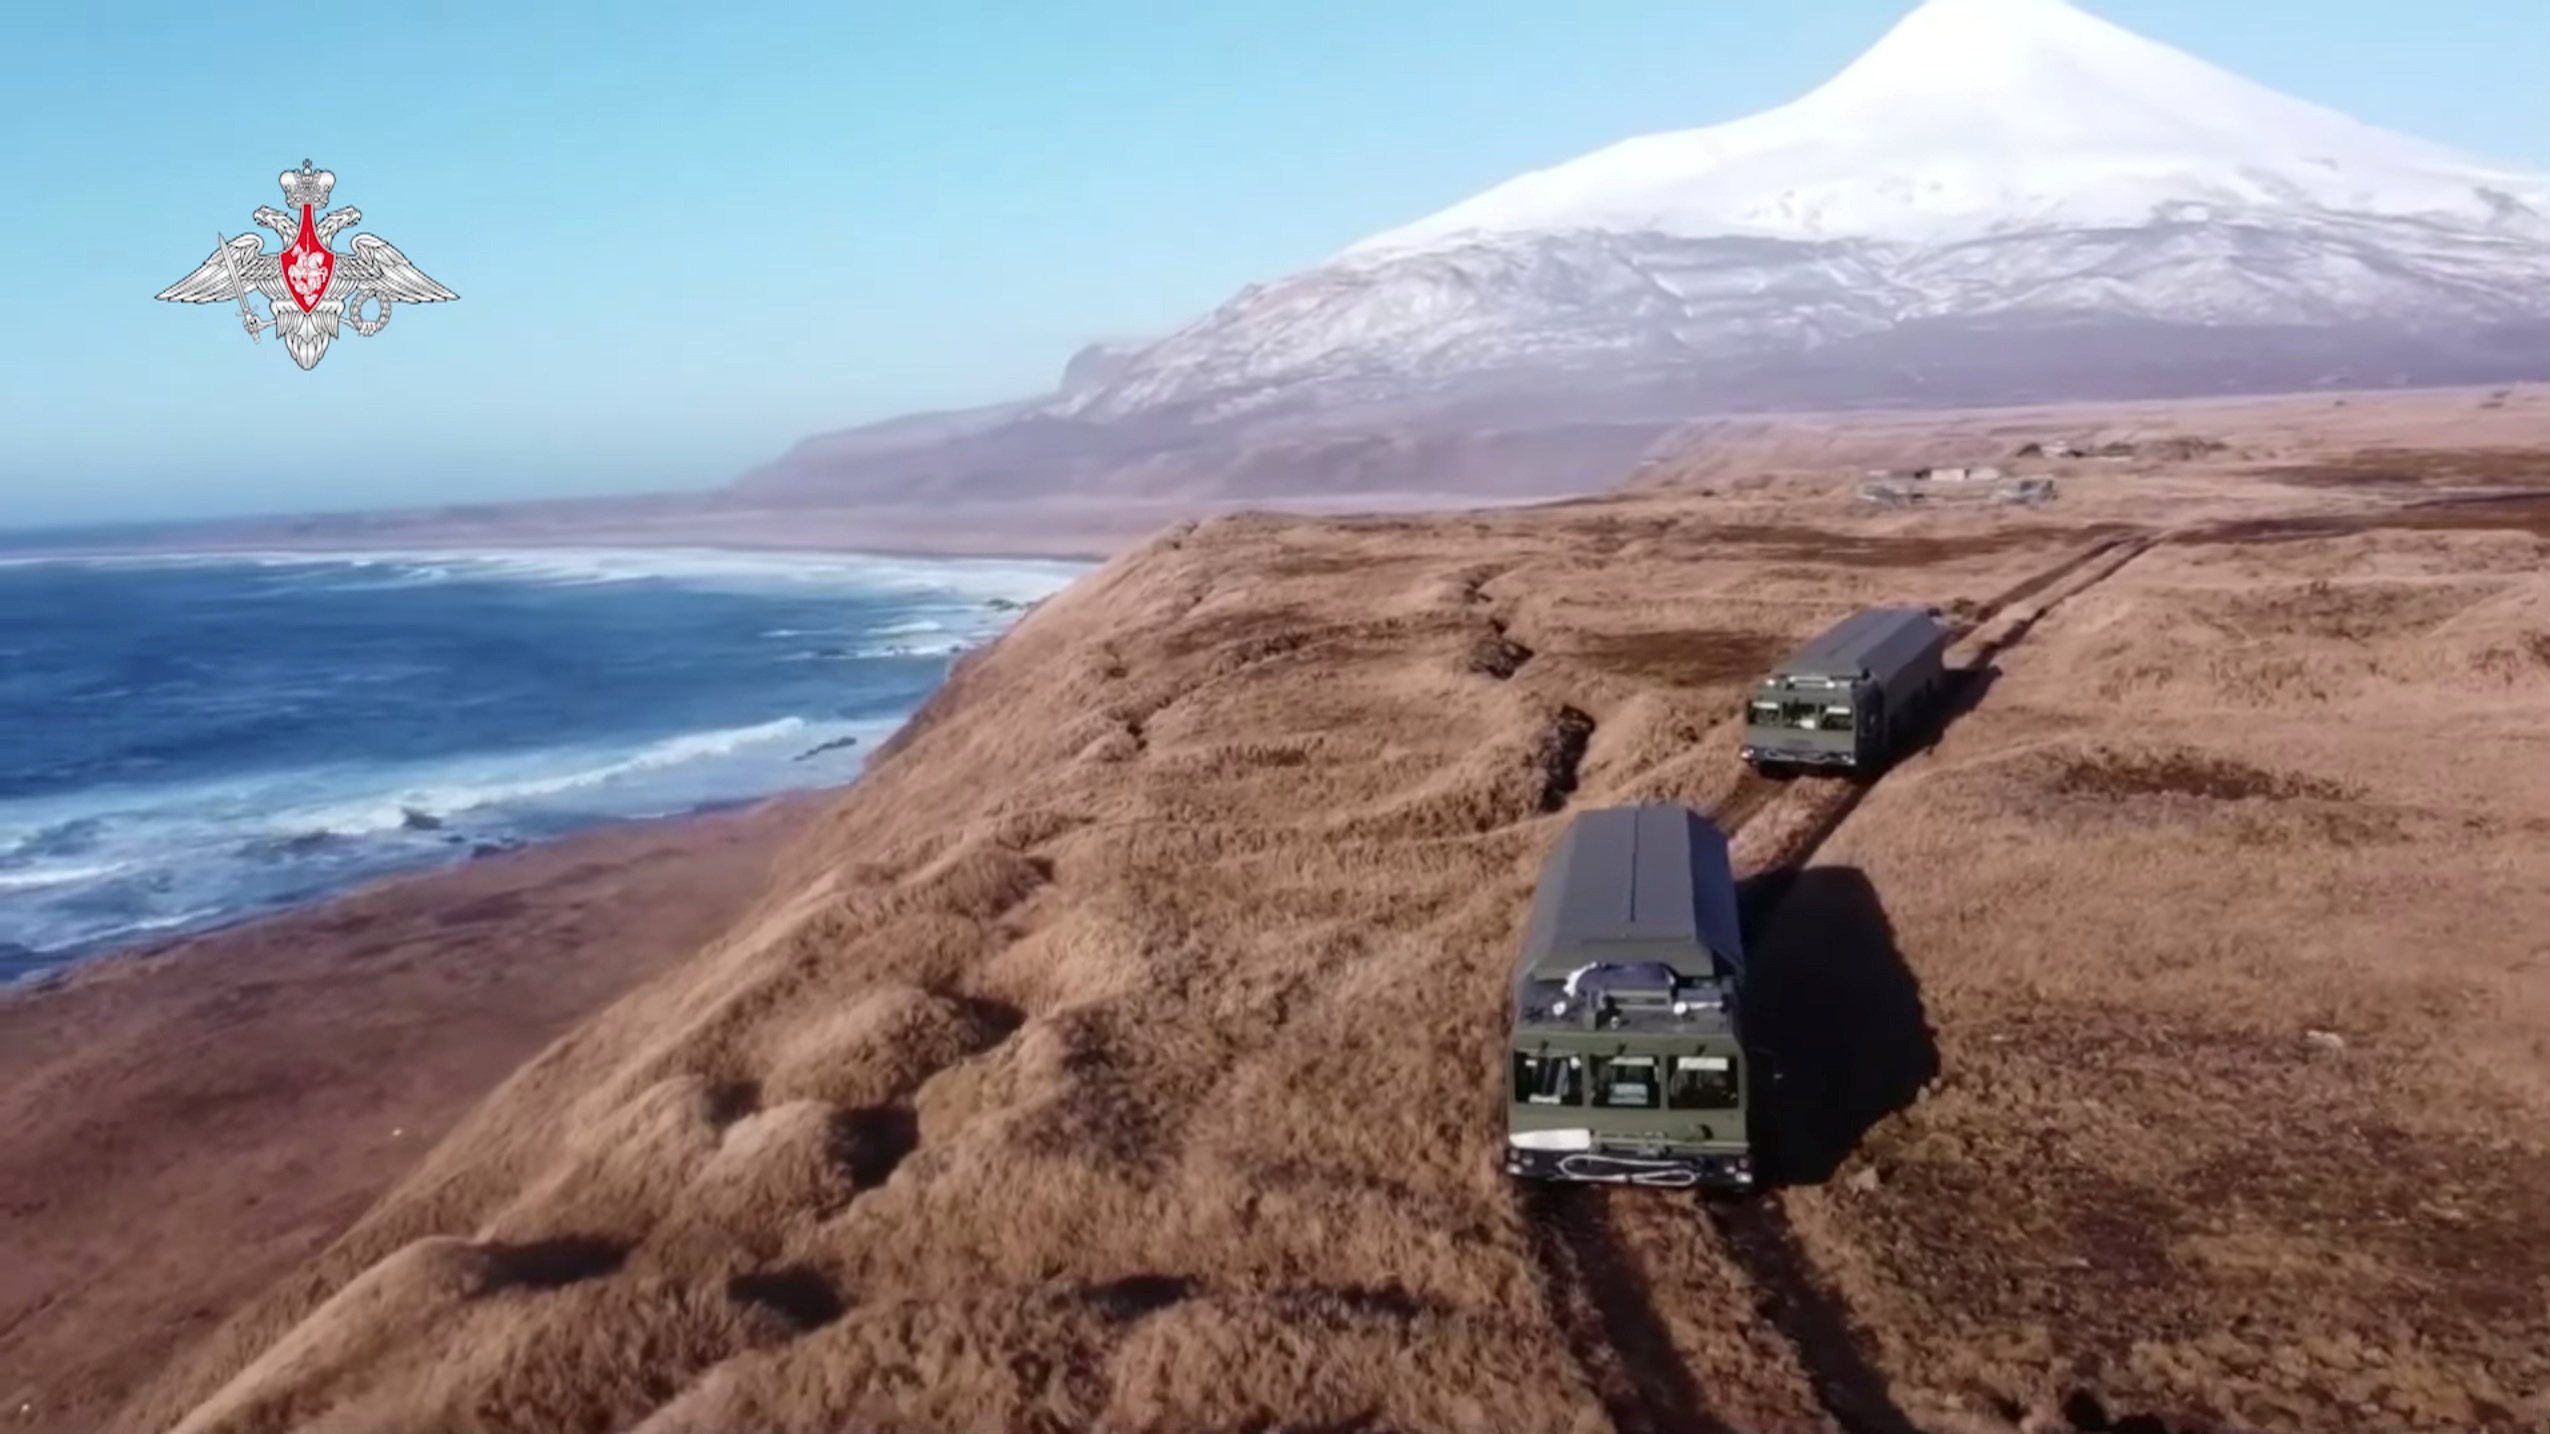 Russia's carriers of the Bastion coastal missile defence system drive on the remote Matua island, which is part the Kuril island chain also known as the Northern Territories in Japan, in the Pacific, in this still image taken from video released by the Russian Defence Ministry December 2, 2021. Russian Defence Ministry/Handout via REUTERS  